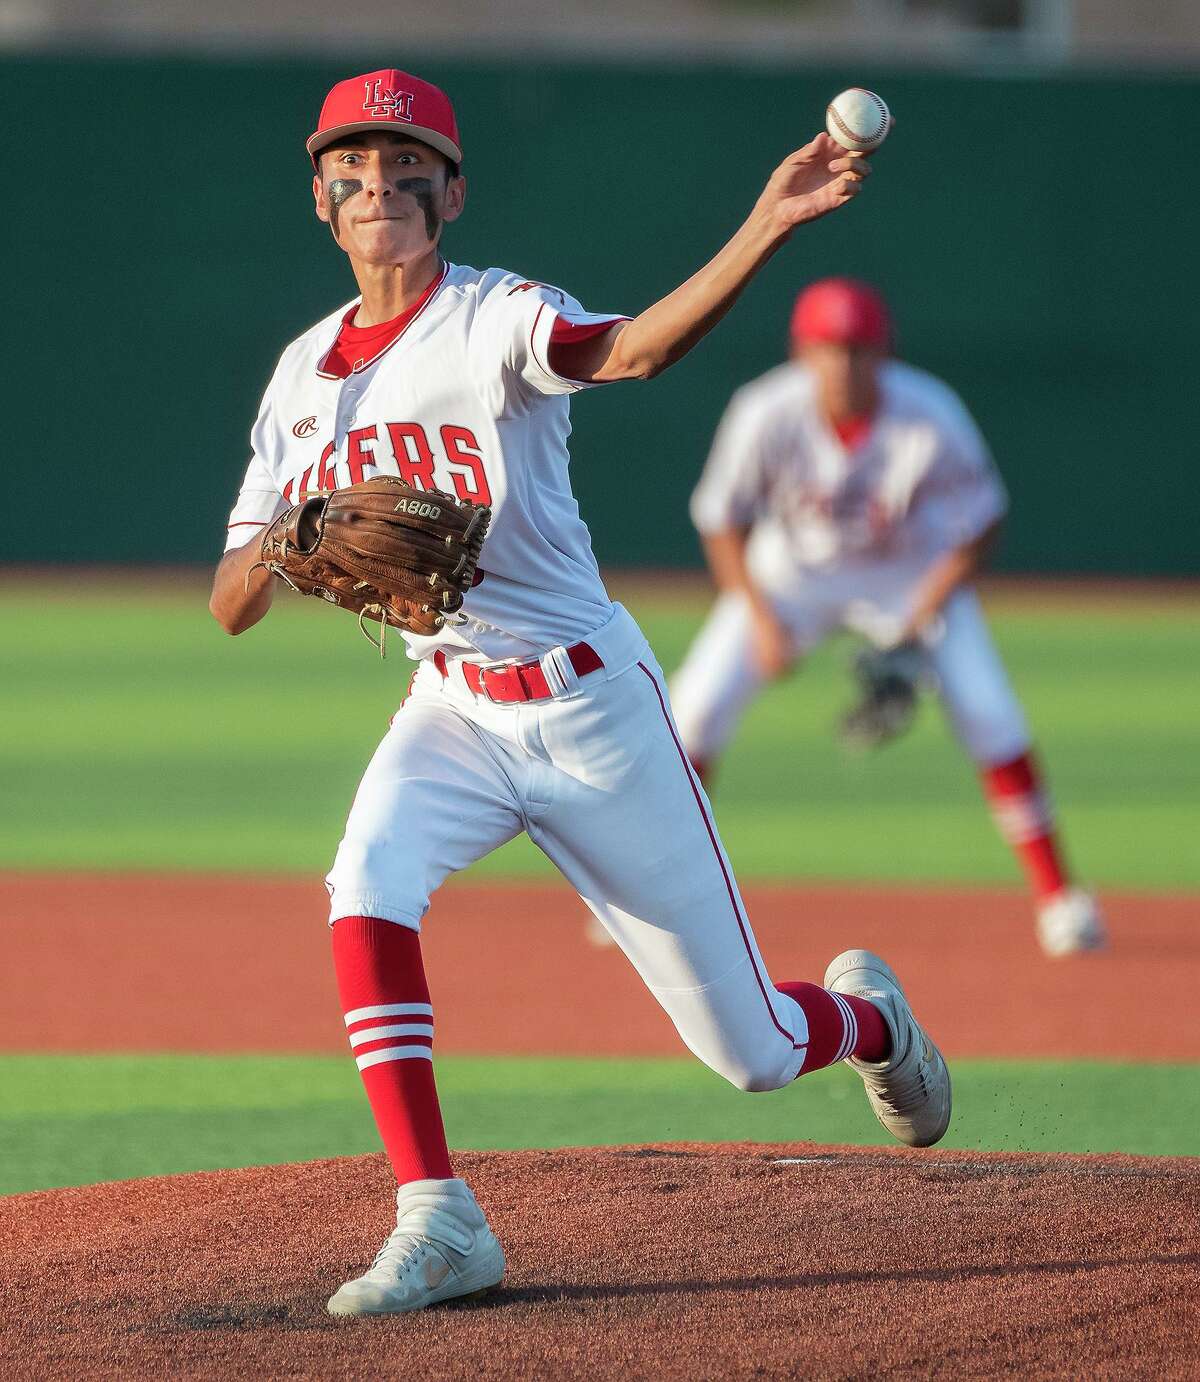 Martin High School’s Azael Perez pitches during a game against Veterans Memorial High School, Tuesday, April 12, 2022 at Veterans Field. Perez tossed a shutout in the Tigers’ win over Rio Grande City on Tuesday.